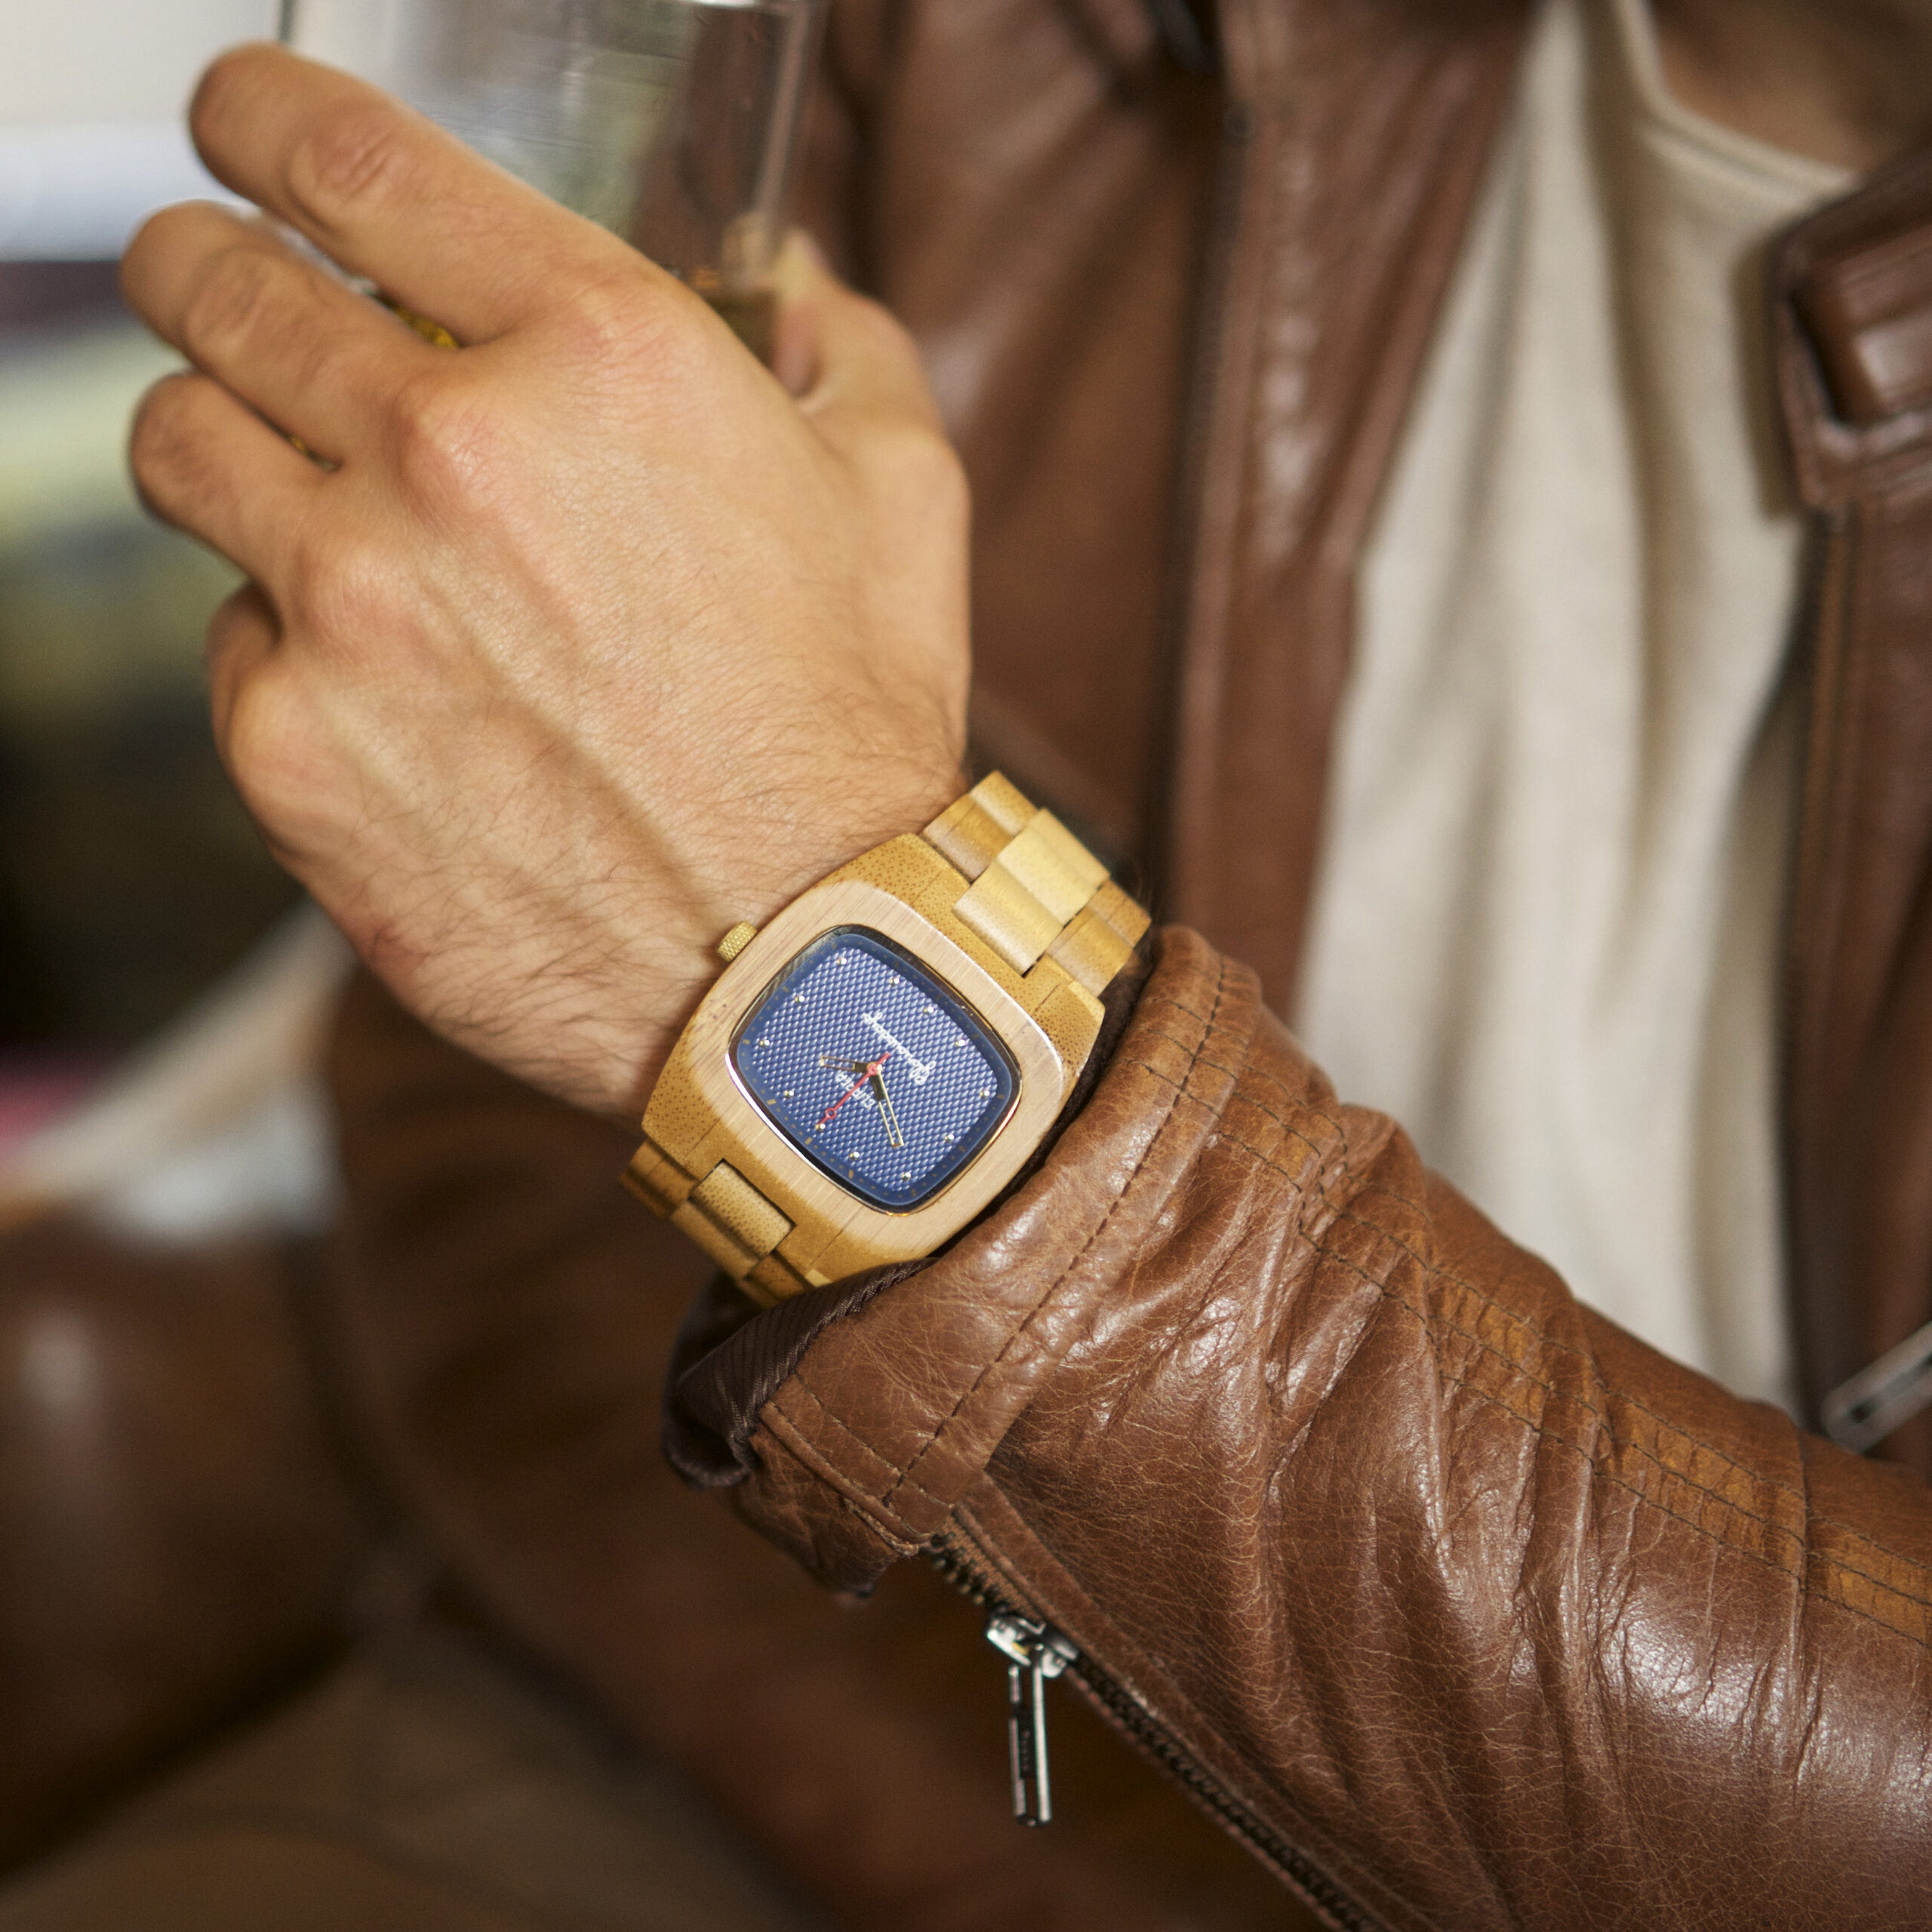 Clipper bamboo watch wrist shot with brown leather jacket.